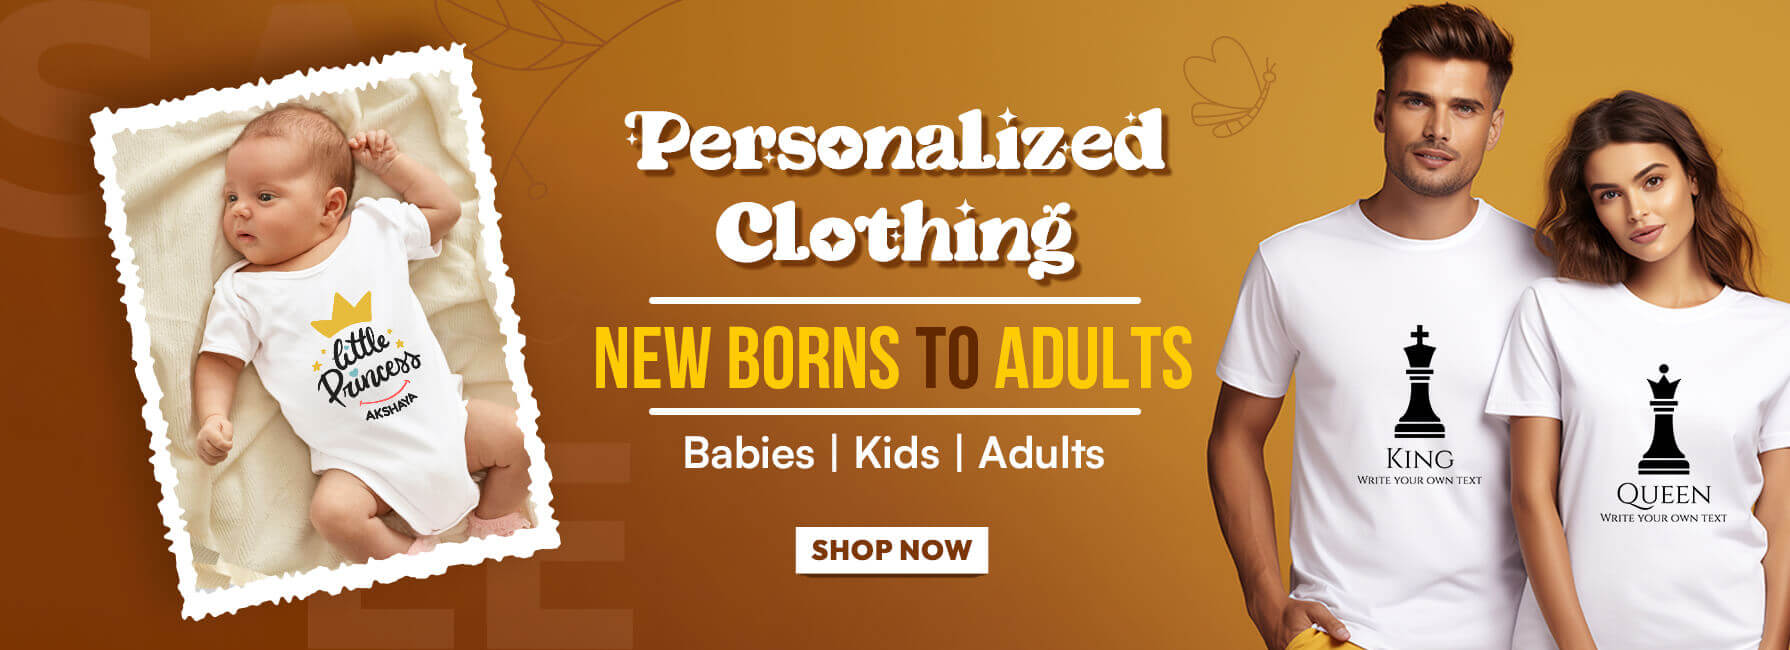 Personalized Clothing